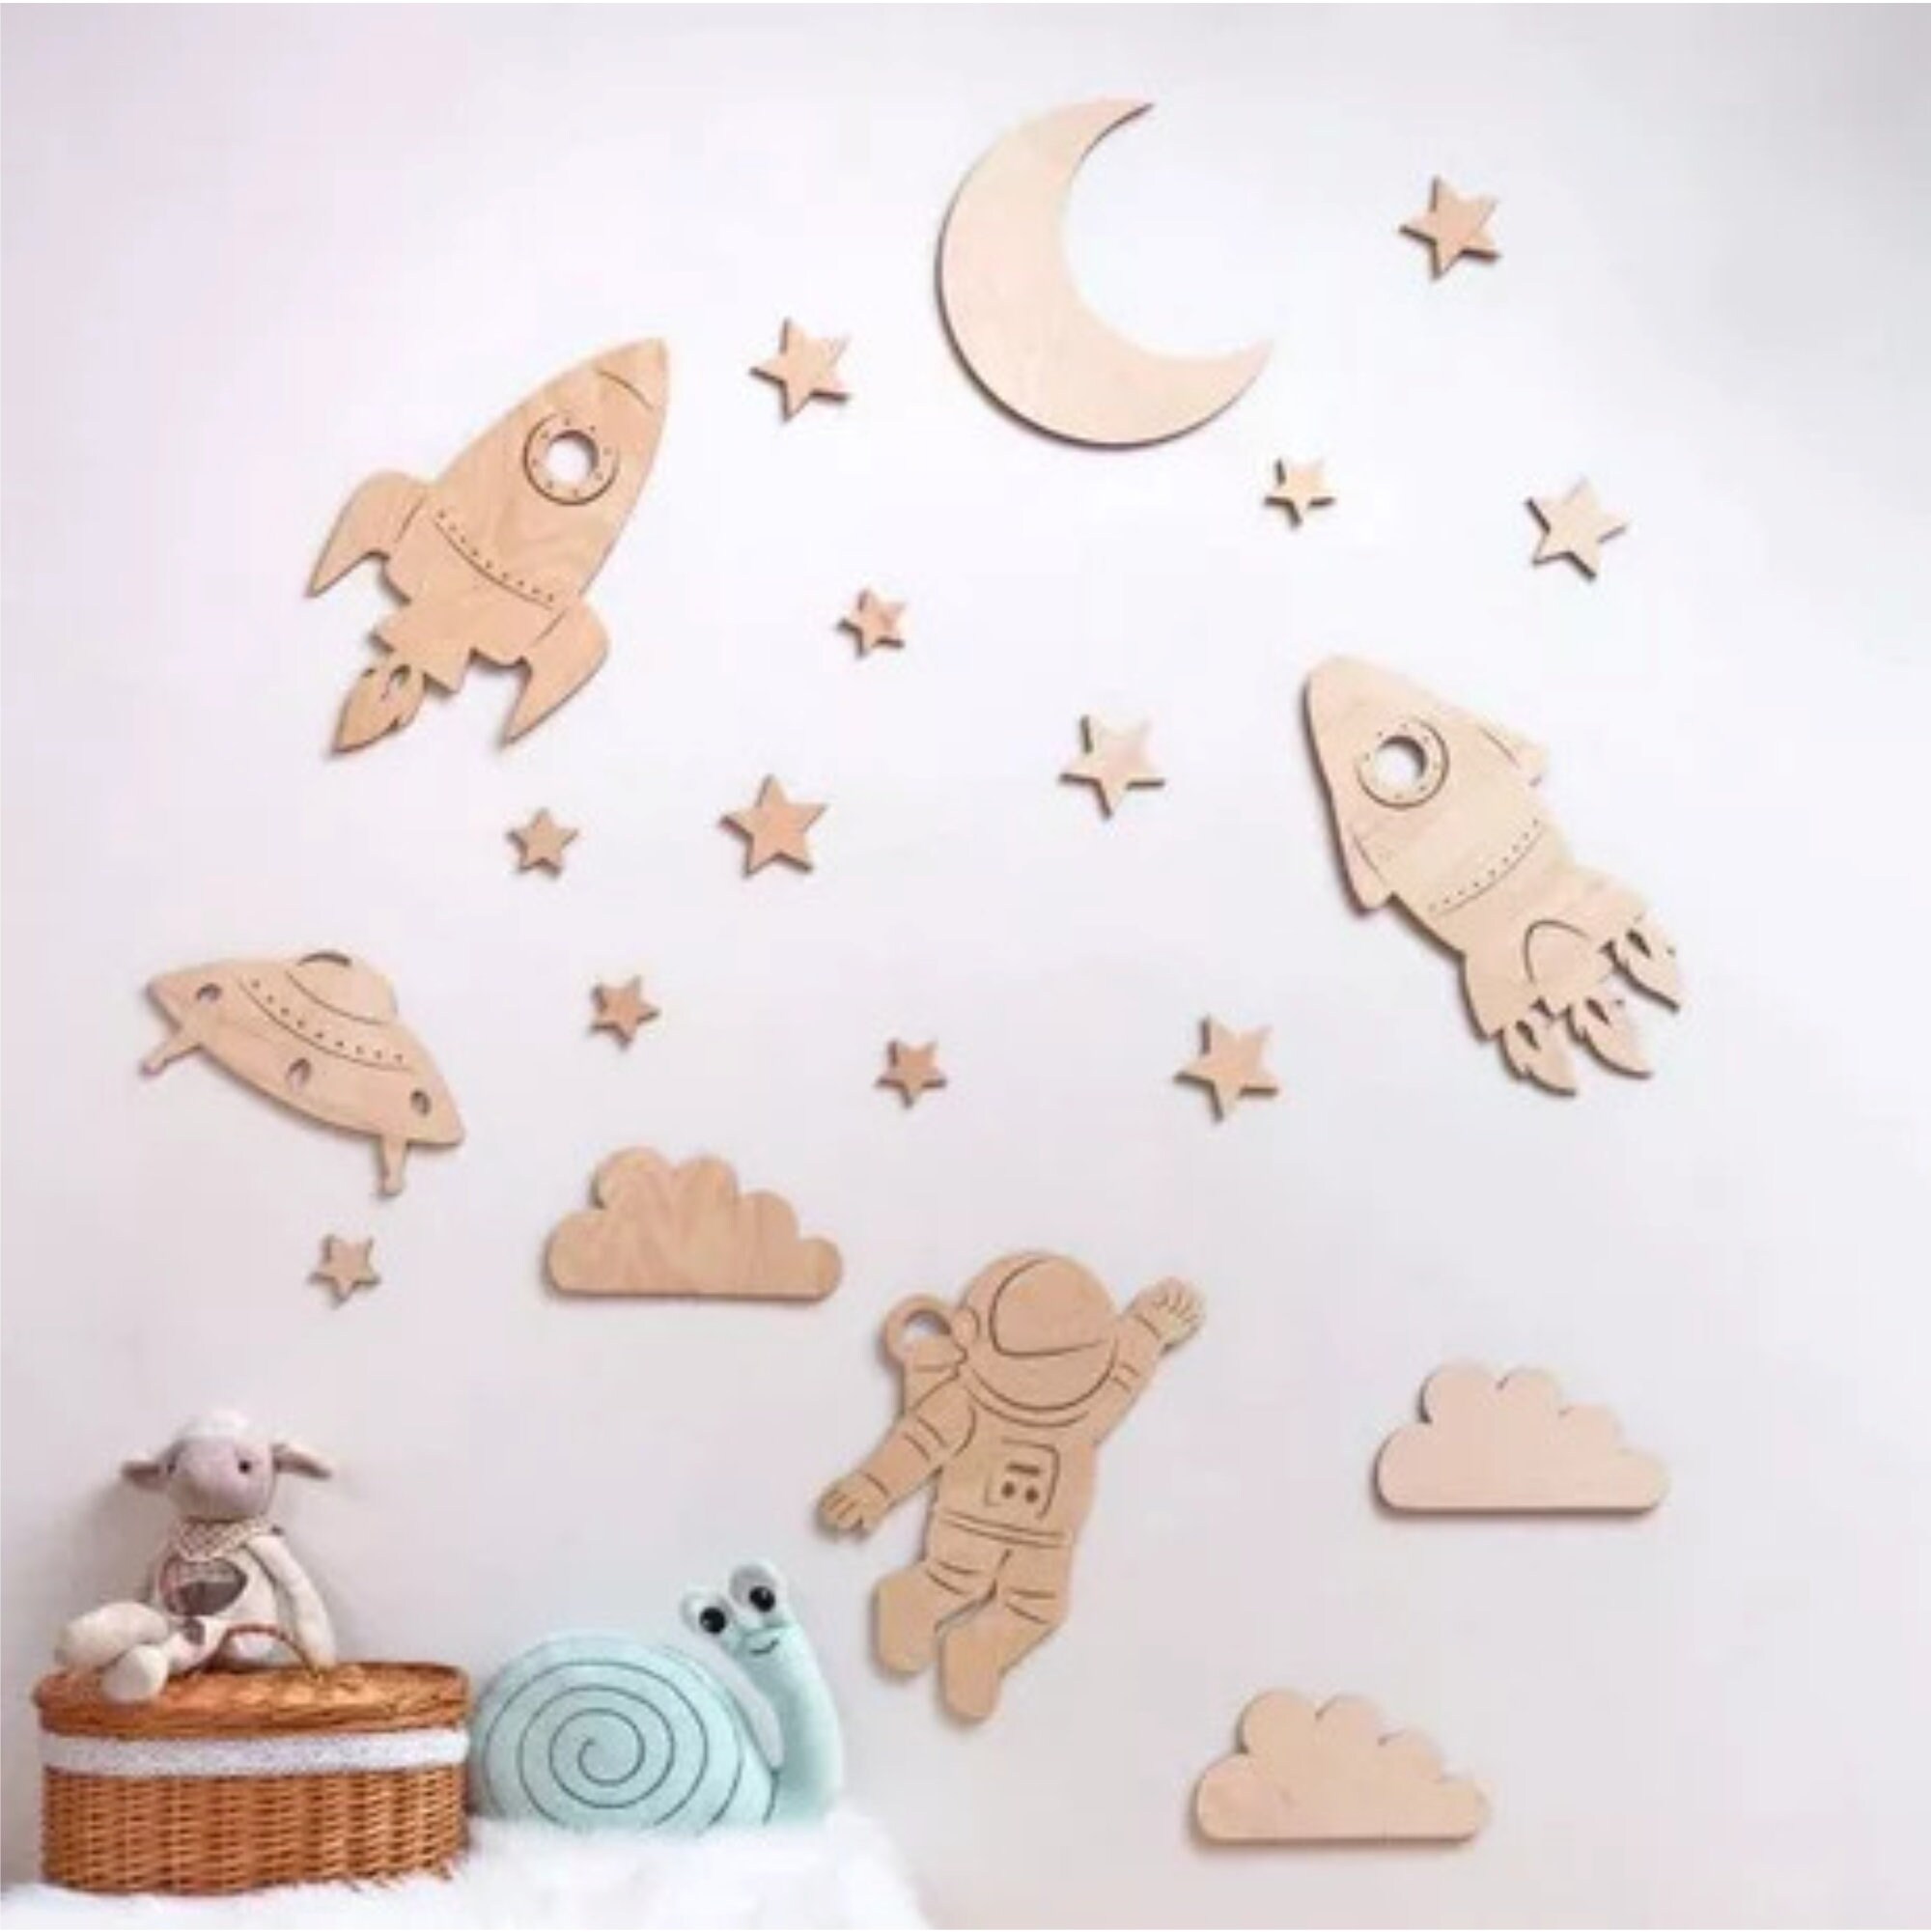 Wooden Tree DIY Supplies, Wooden Shapes For Crafts, Wooden Craft Shapes,  MDF Craft Shapes, MDF Shapes - T006